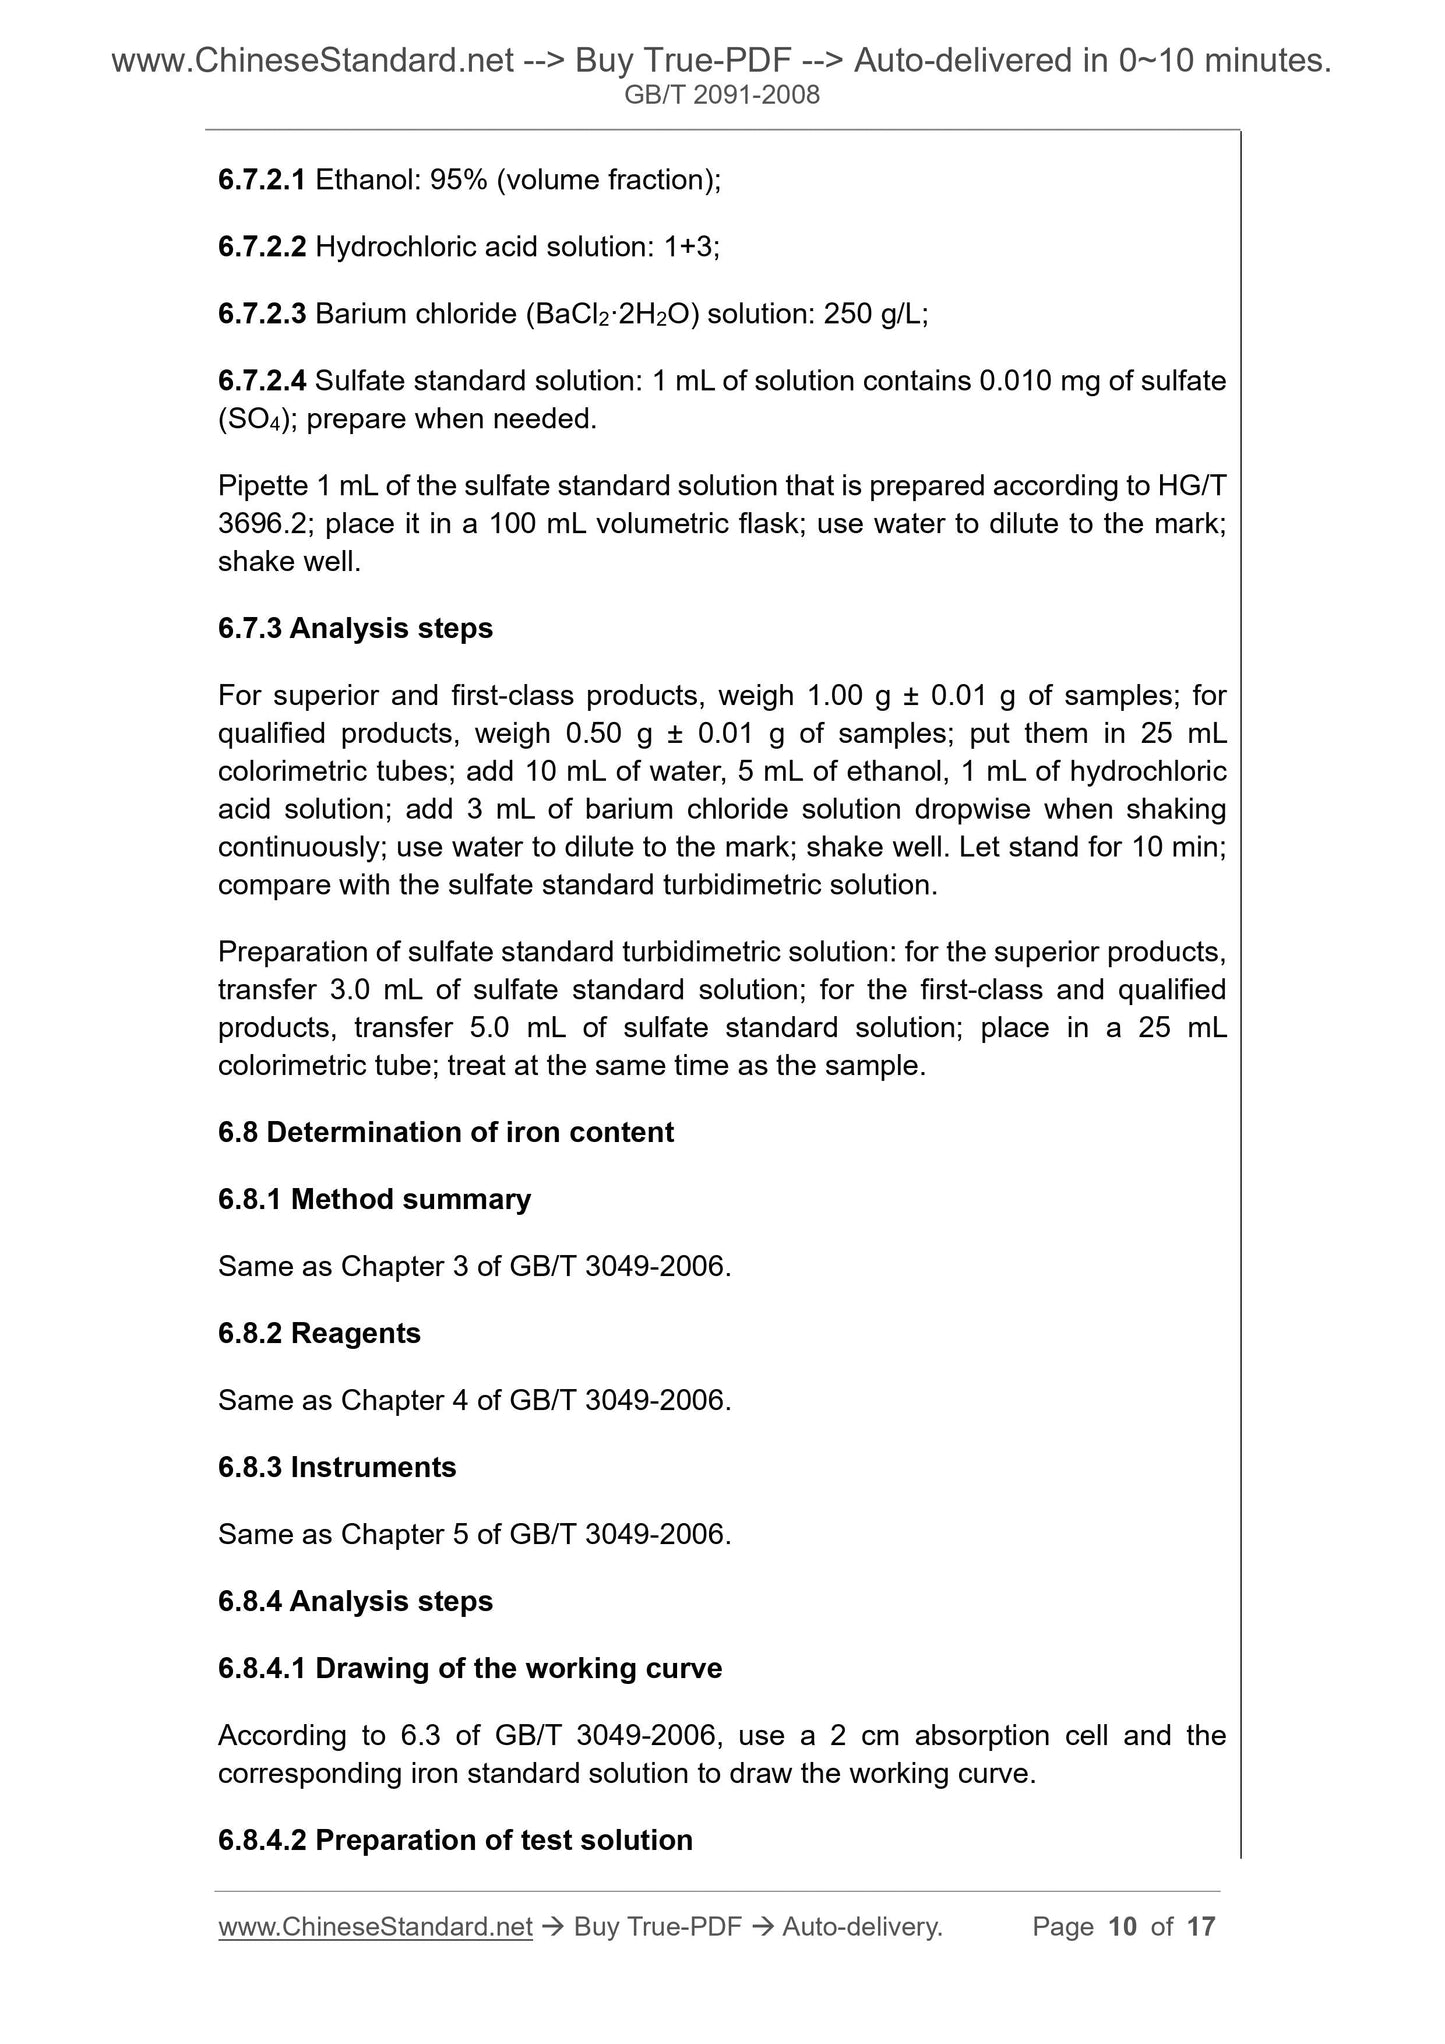 GB/T 2091-2008 Page 7